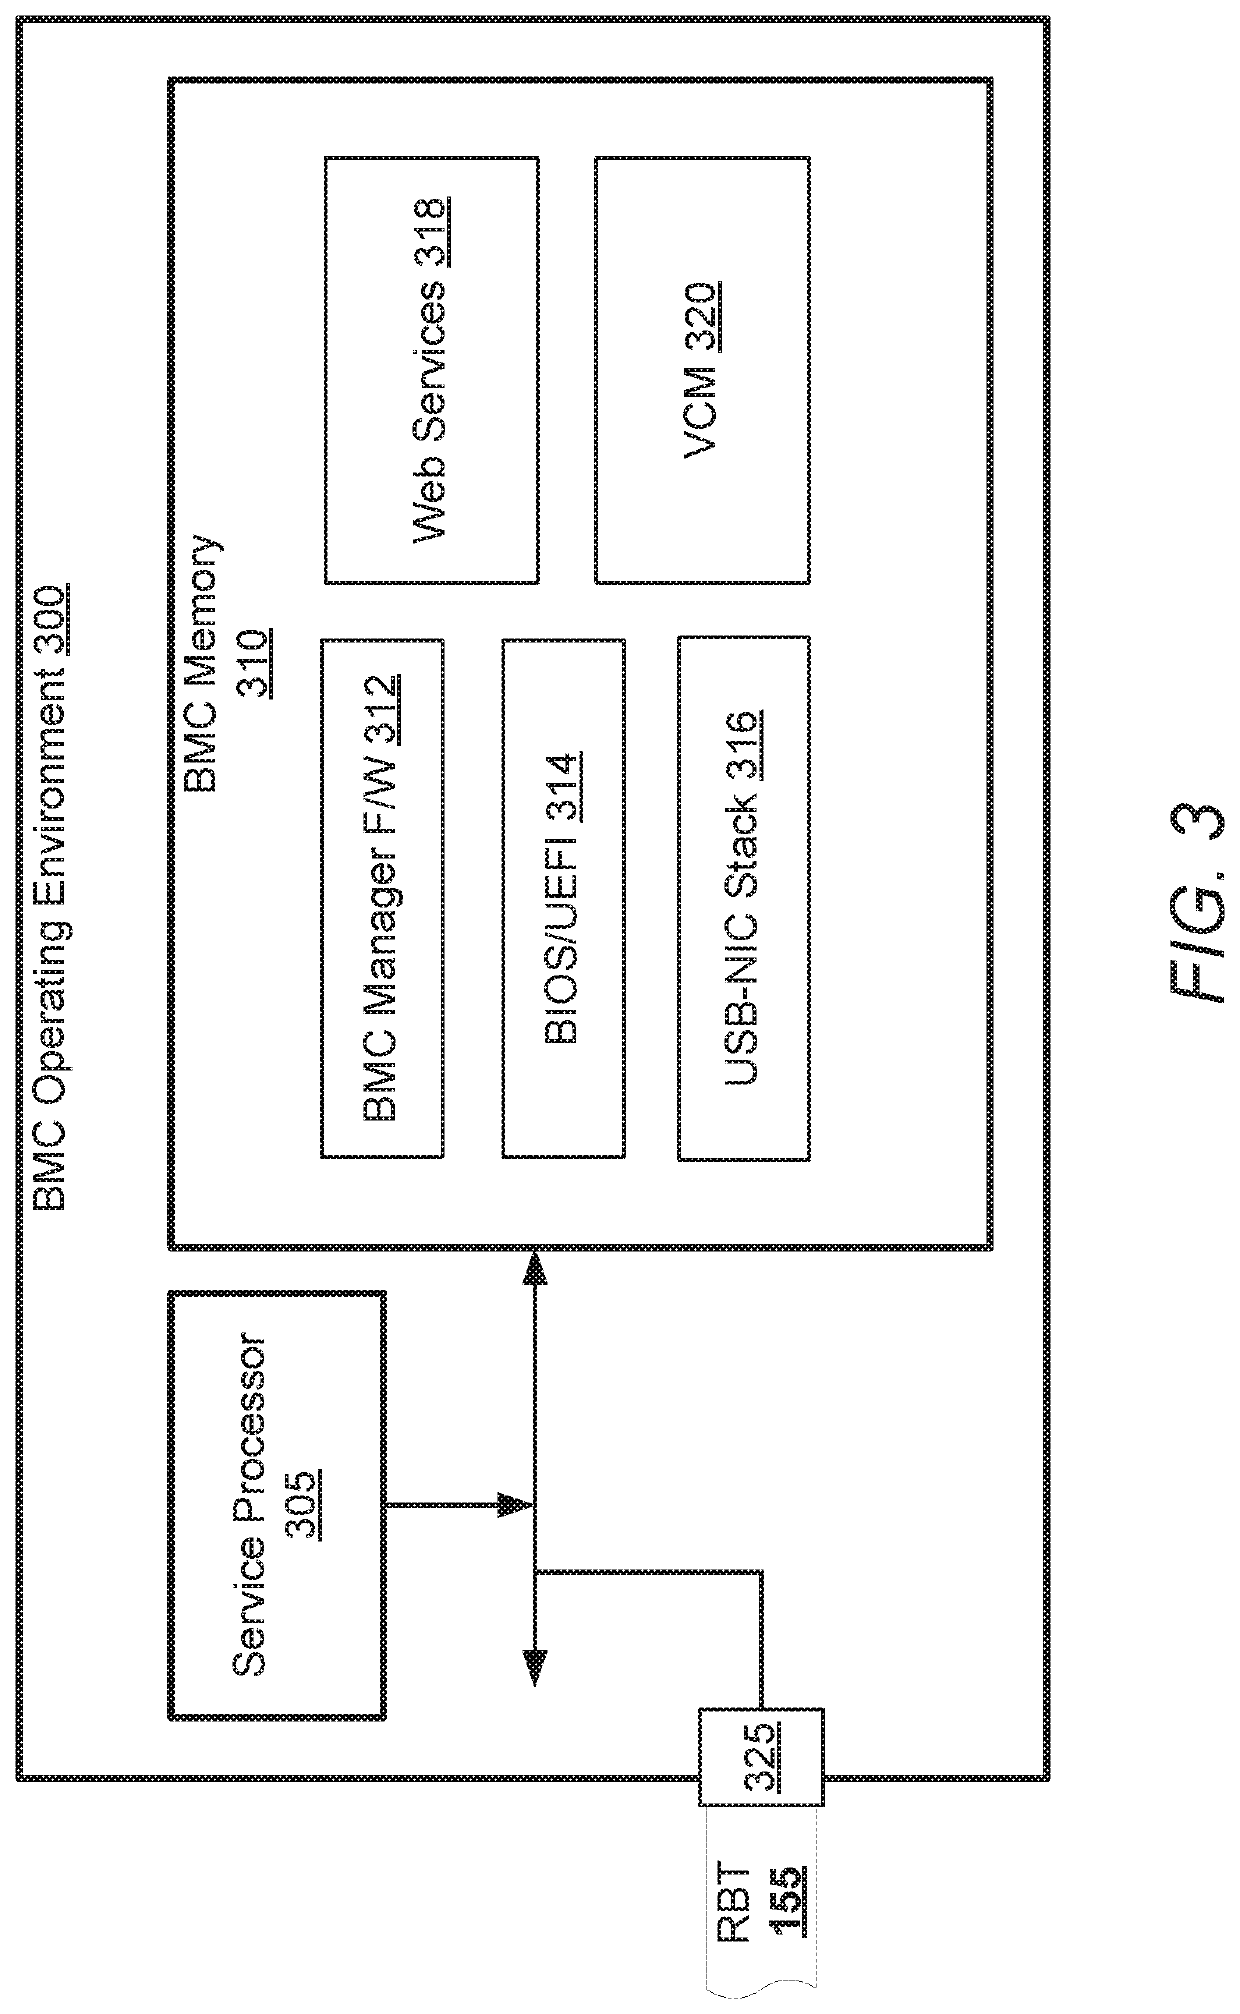 Adding network controller sideband interface (NC-SI) sideband and management to a high power consumption device